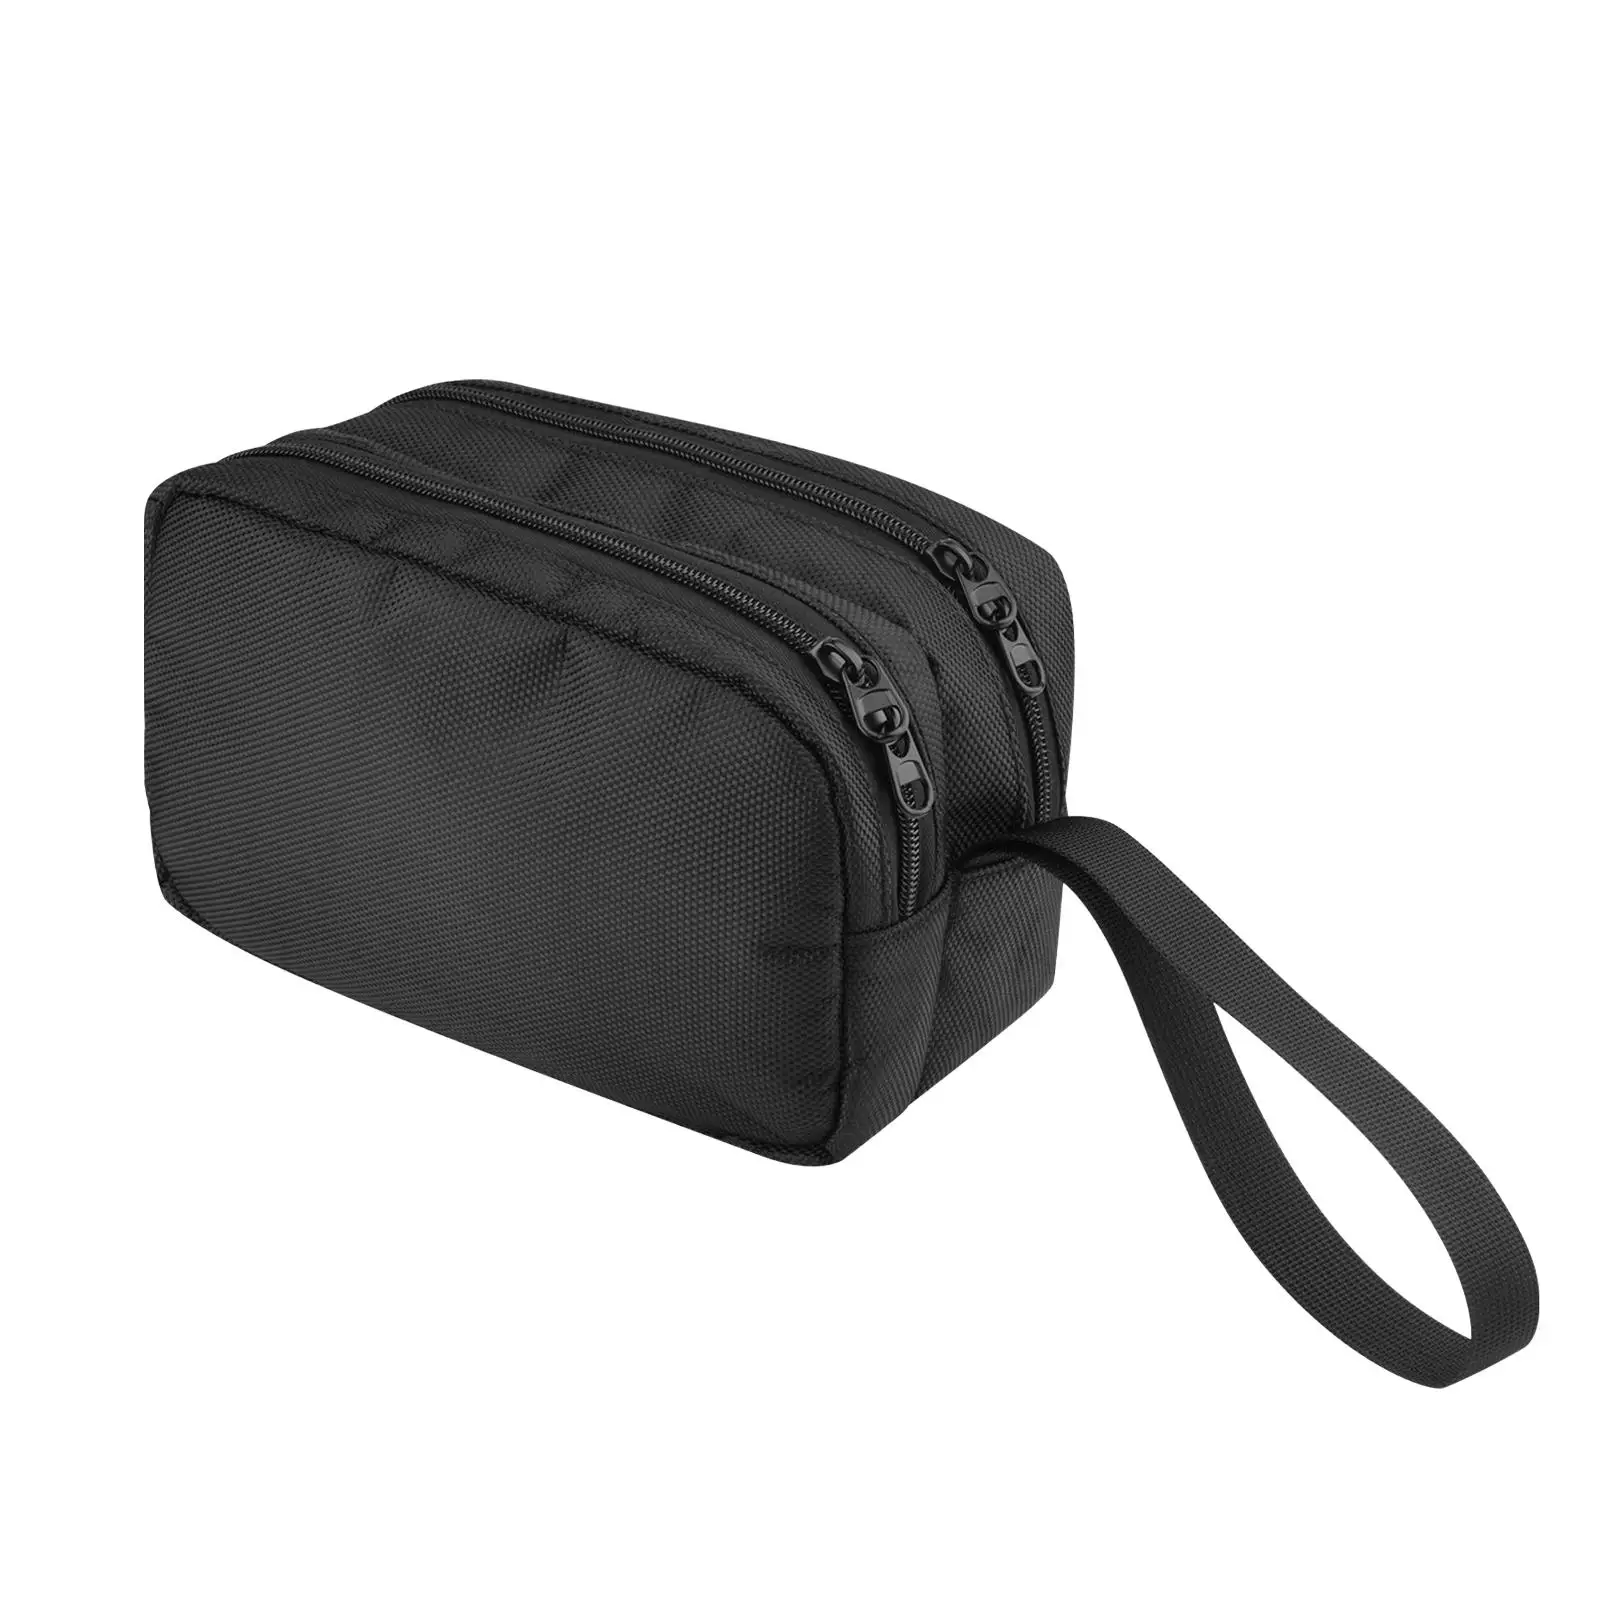 Black Carrying Case Multiple Pockets Design Waterproof Two Dual Zippers Design Multifunction Bag for Cords Electronic Product